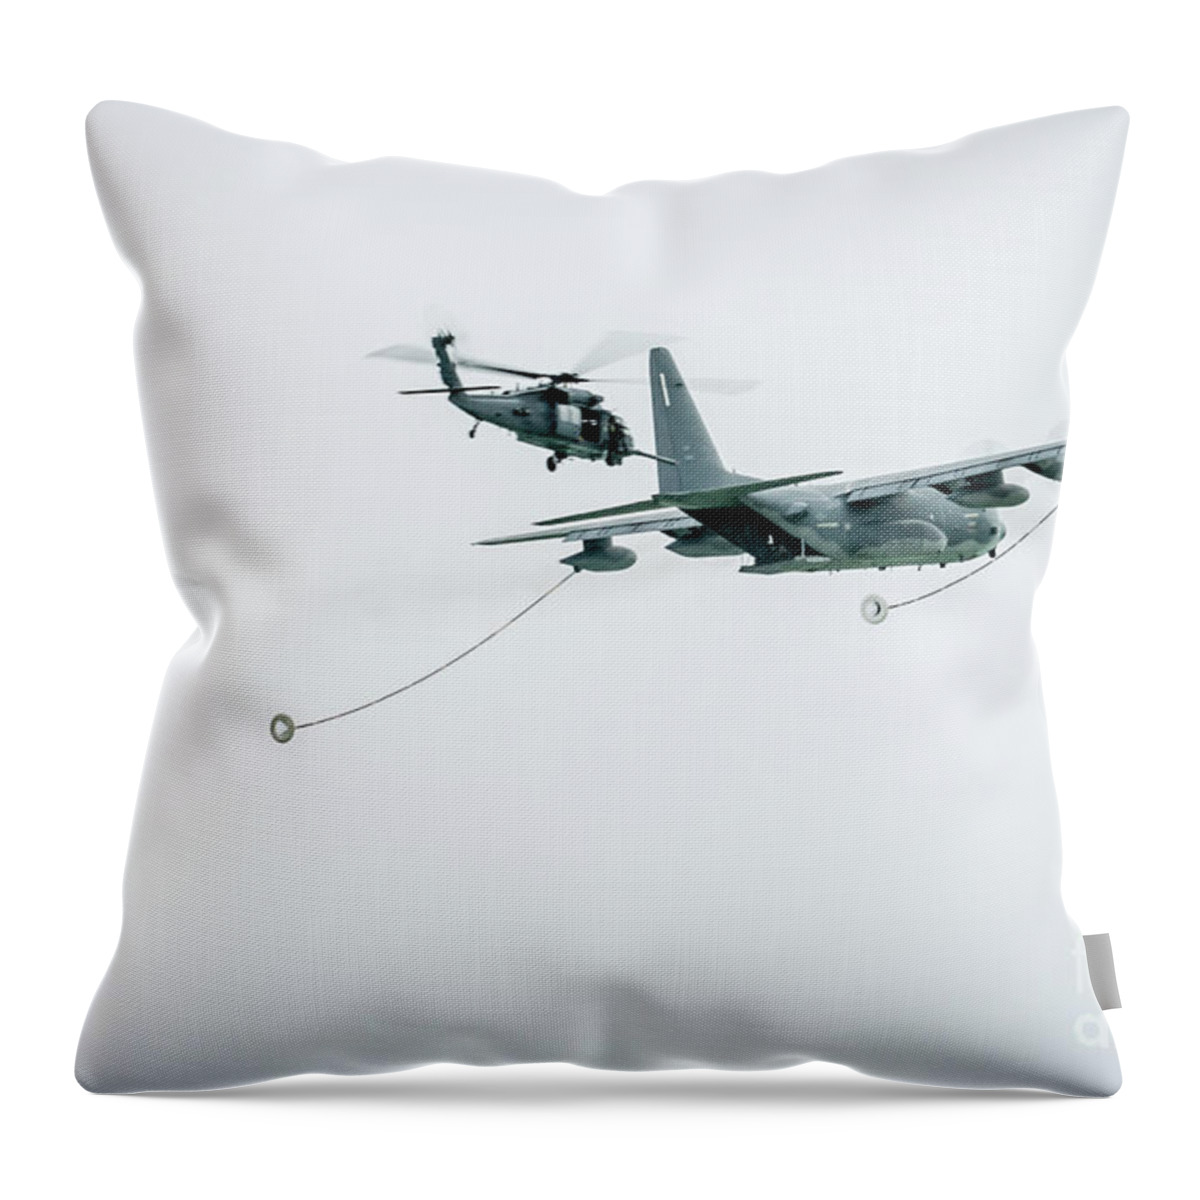 C-130 Tanker Fueling Sikorsky Blackhawk Helicopter Throw Pillow featuring the photograph Joining Up for In Flight Refueling by Rene Triay FineArt Photos